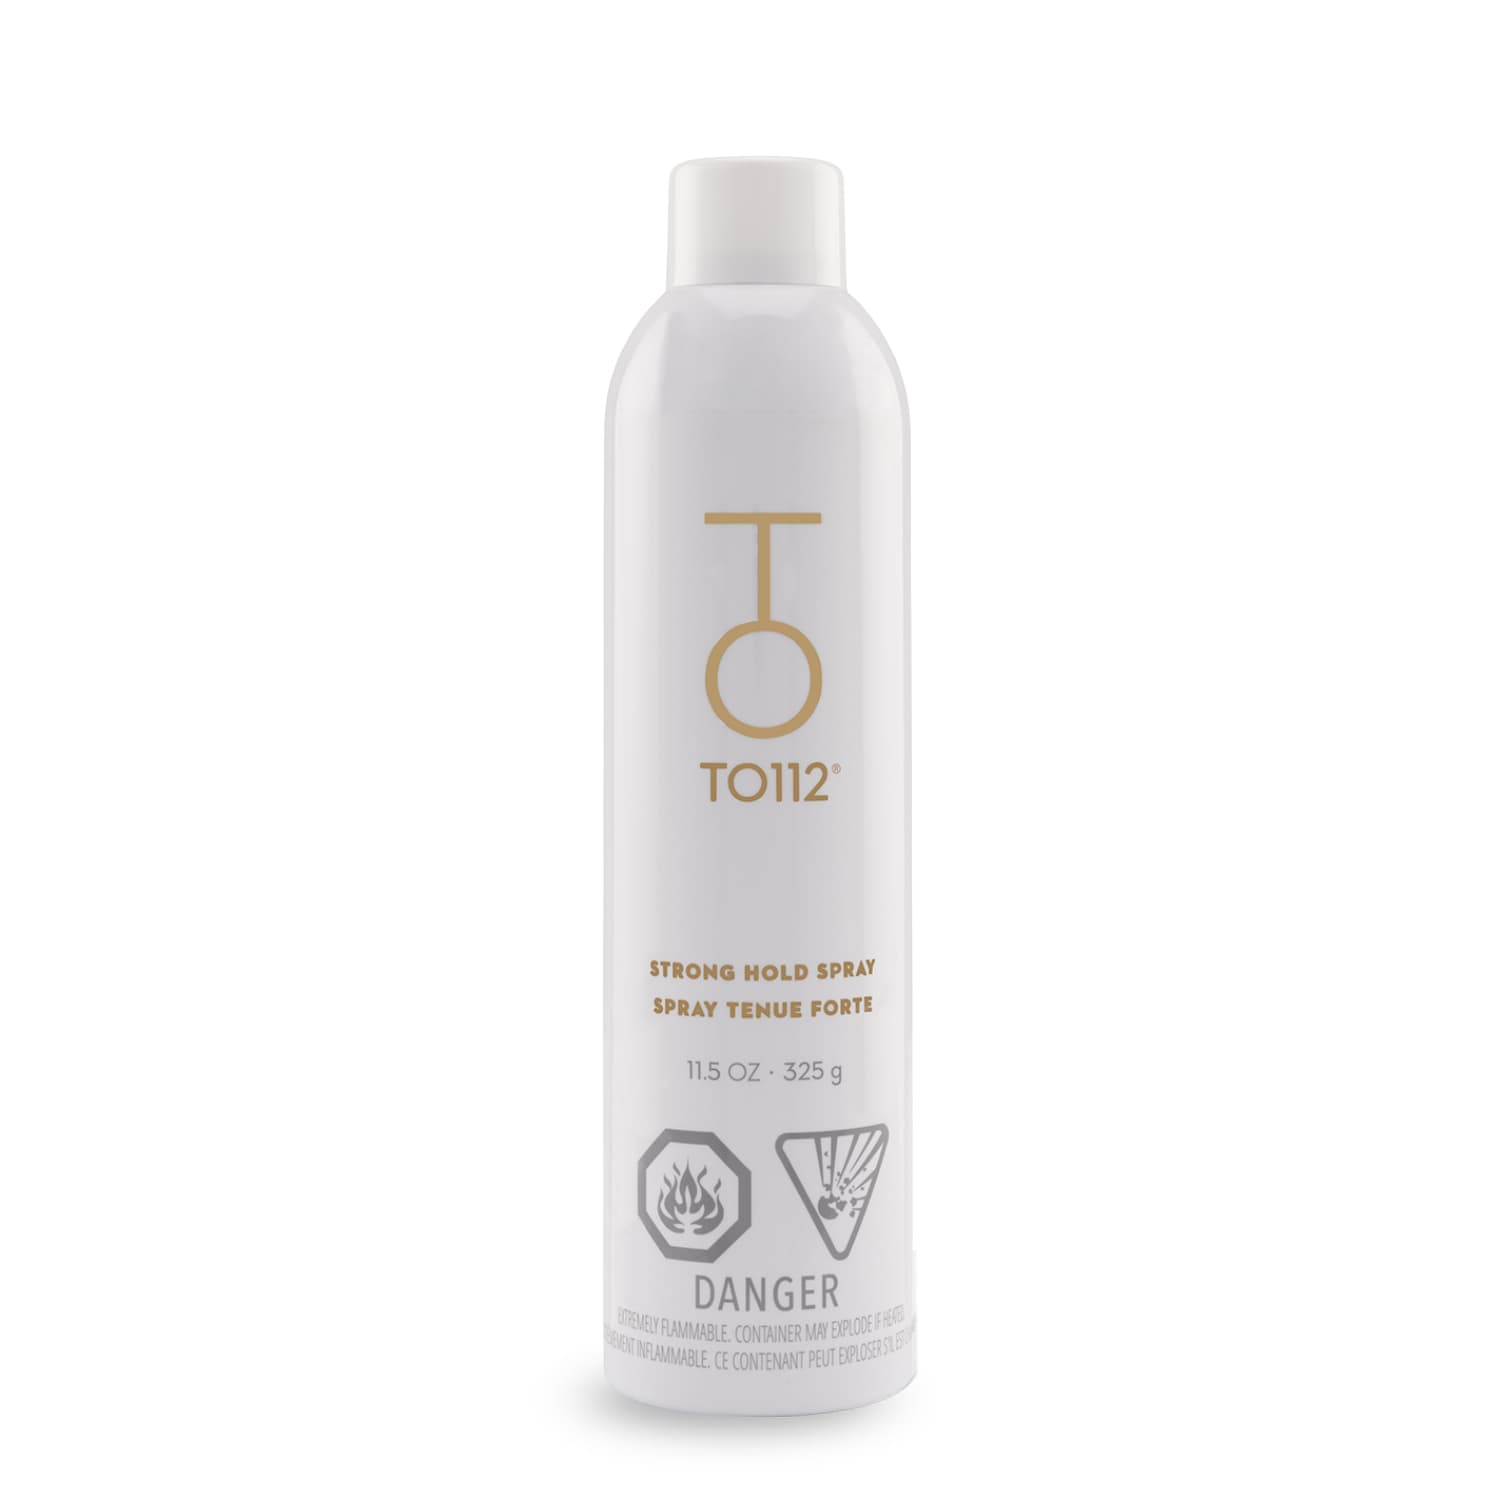 TO112 strong hold spray 11oz